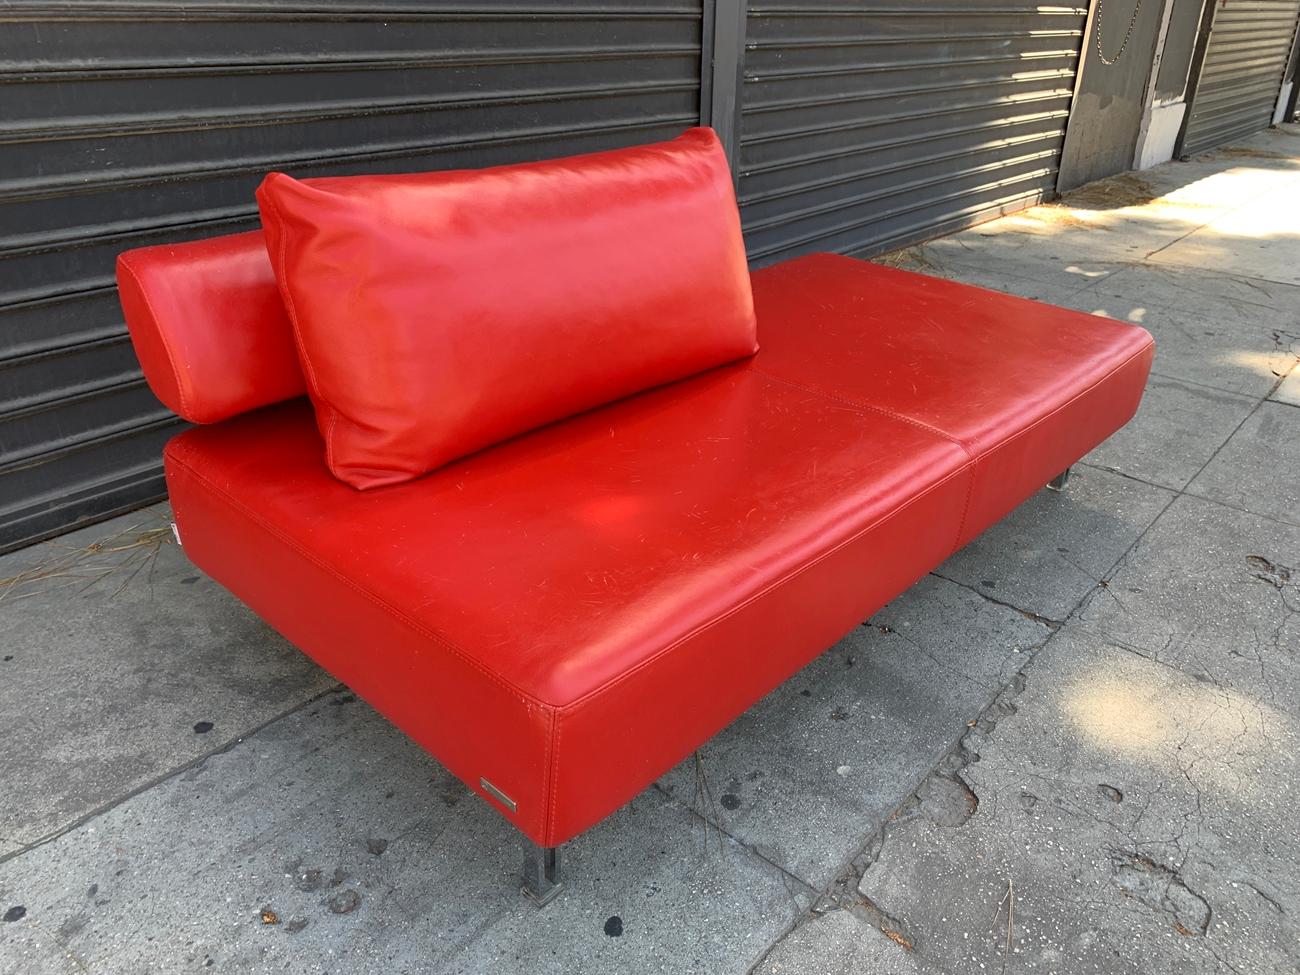 Vintage leather chaise designed and manufactured in Italy by Nicoletti Italia. The sofa is upholstered in red leather with chrome legs and Lucite caps on the feet. The sofa has been used and it has scratches to leather as shown in the photos. The